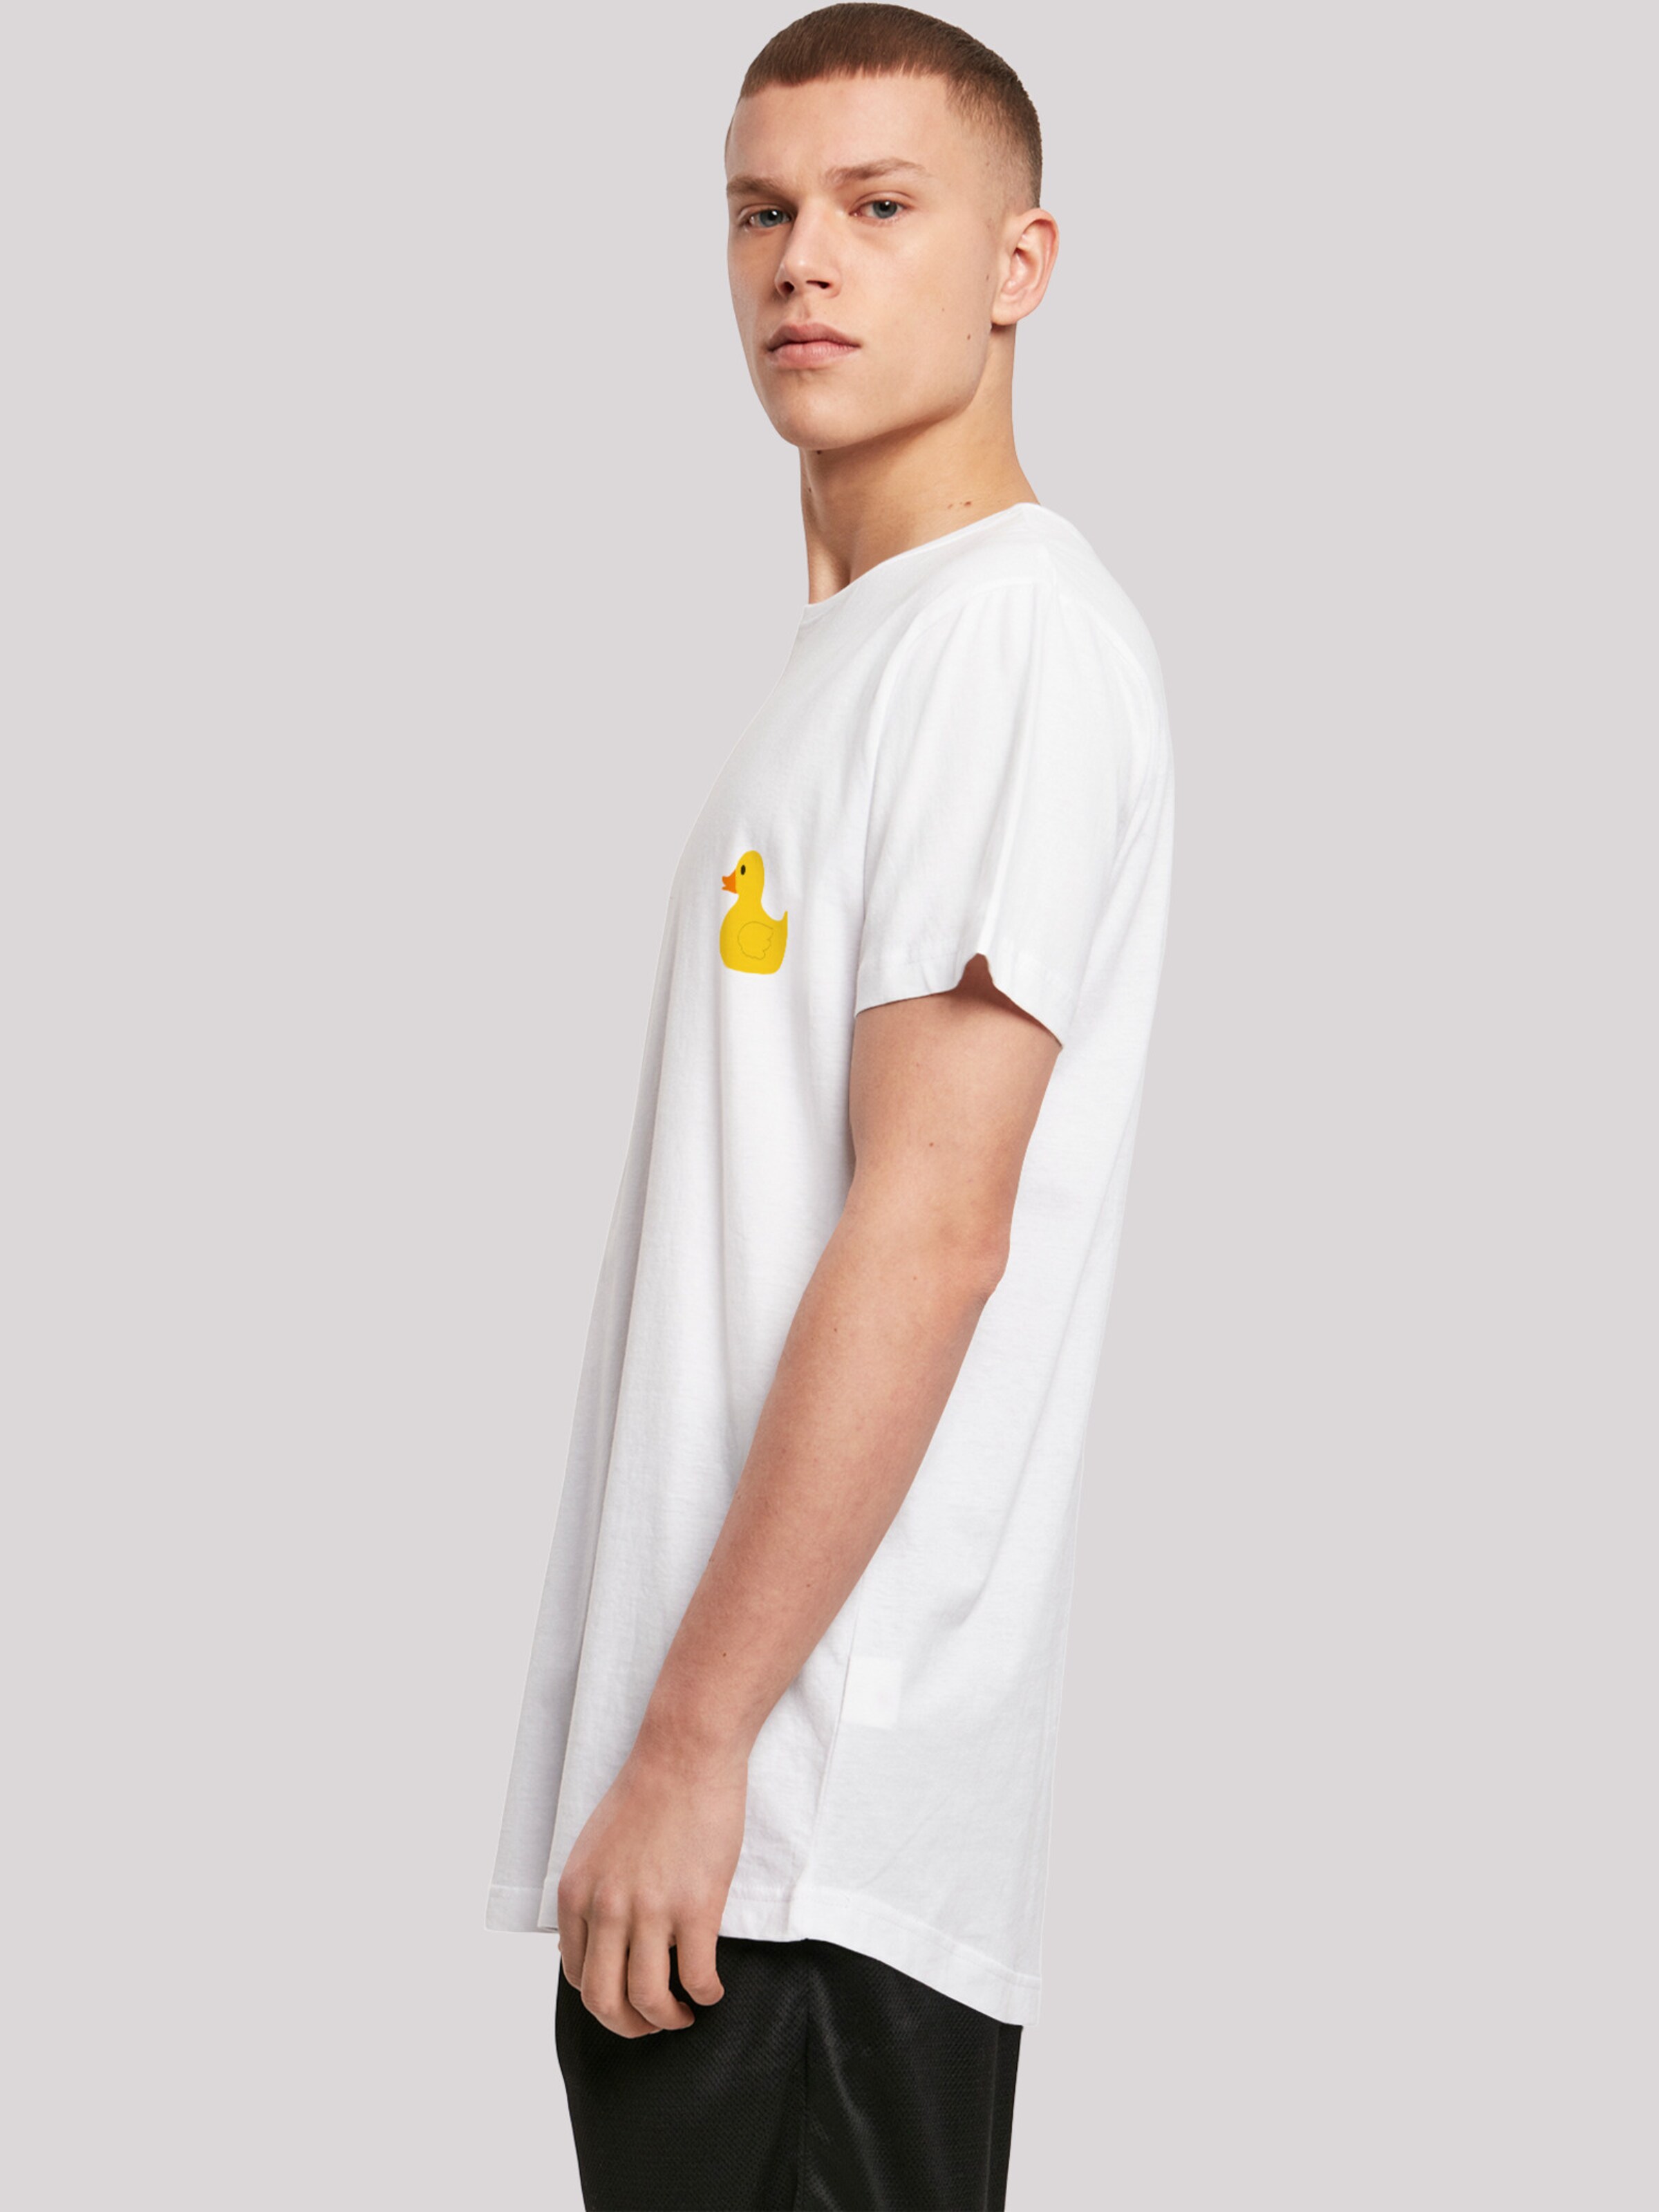 F4NT4STIC Shirt 'Yellow Rubber Duck' in White | ABOUT YOU